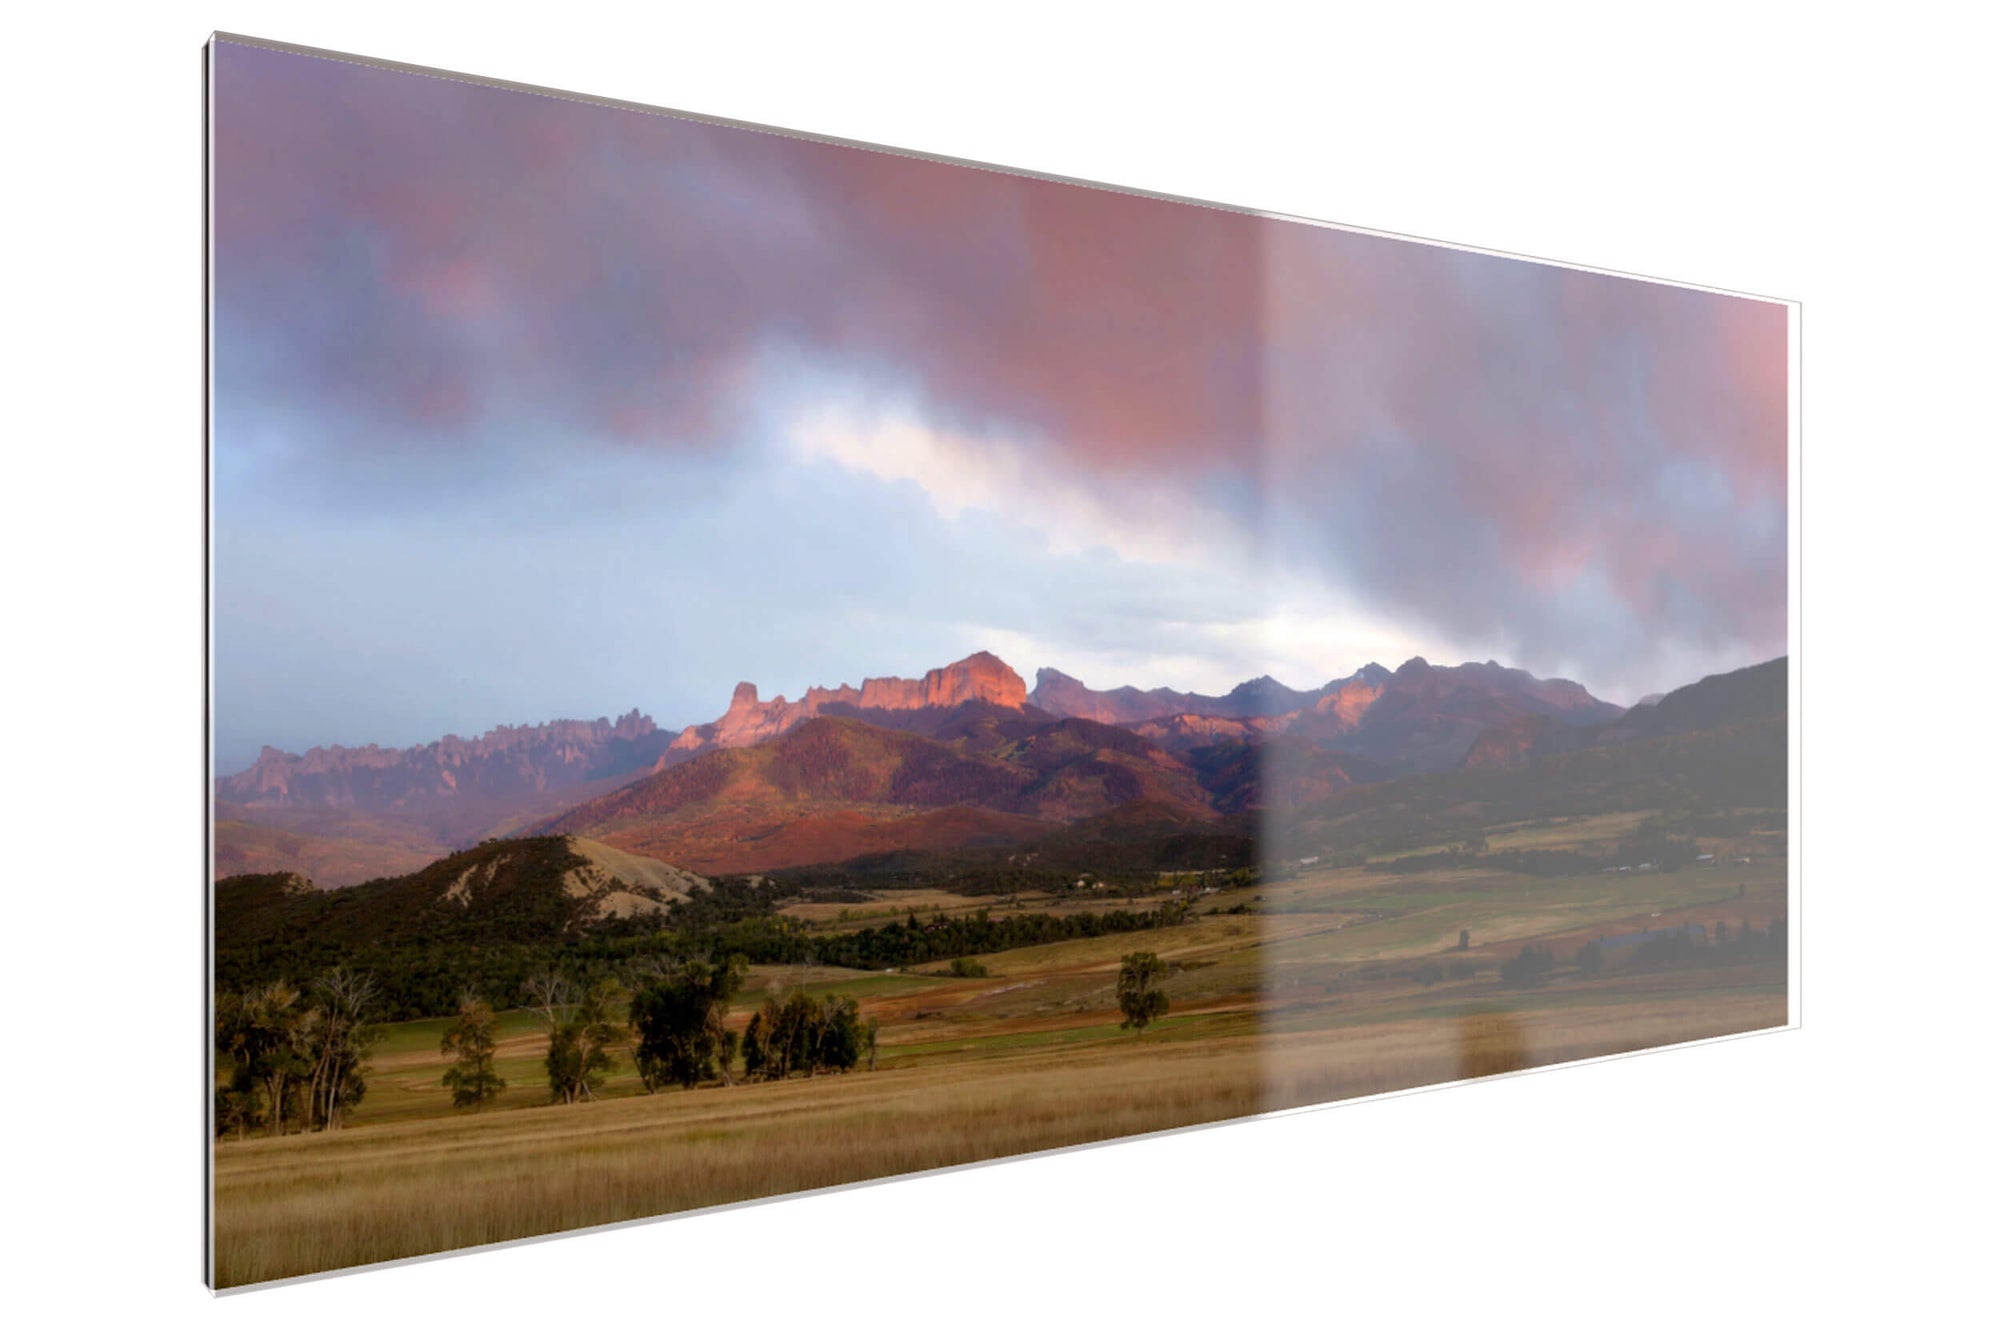 A TruLife acrylic Owl Creek Pass picture at sunset in Ridgway, Colorado.